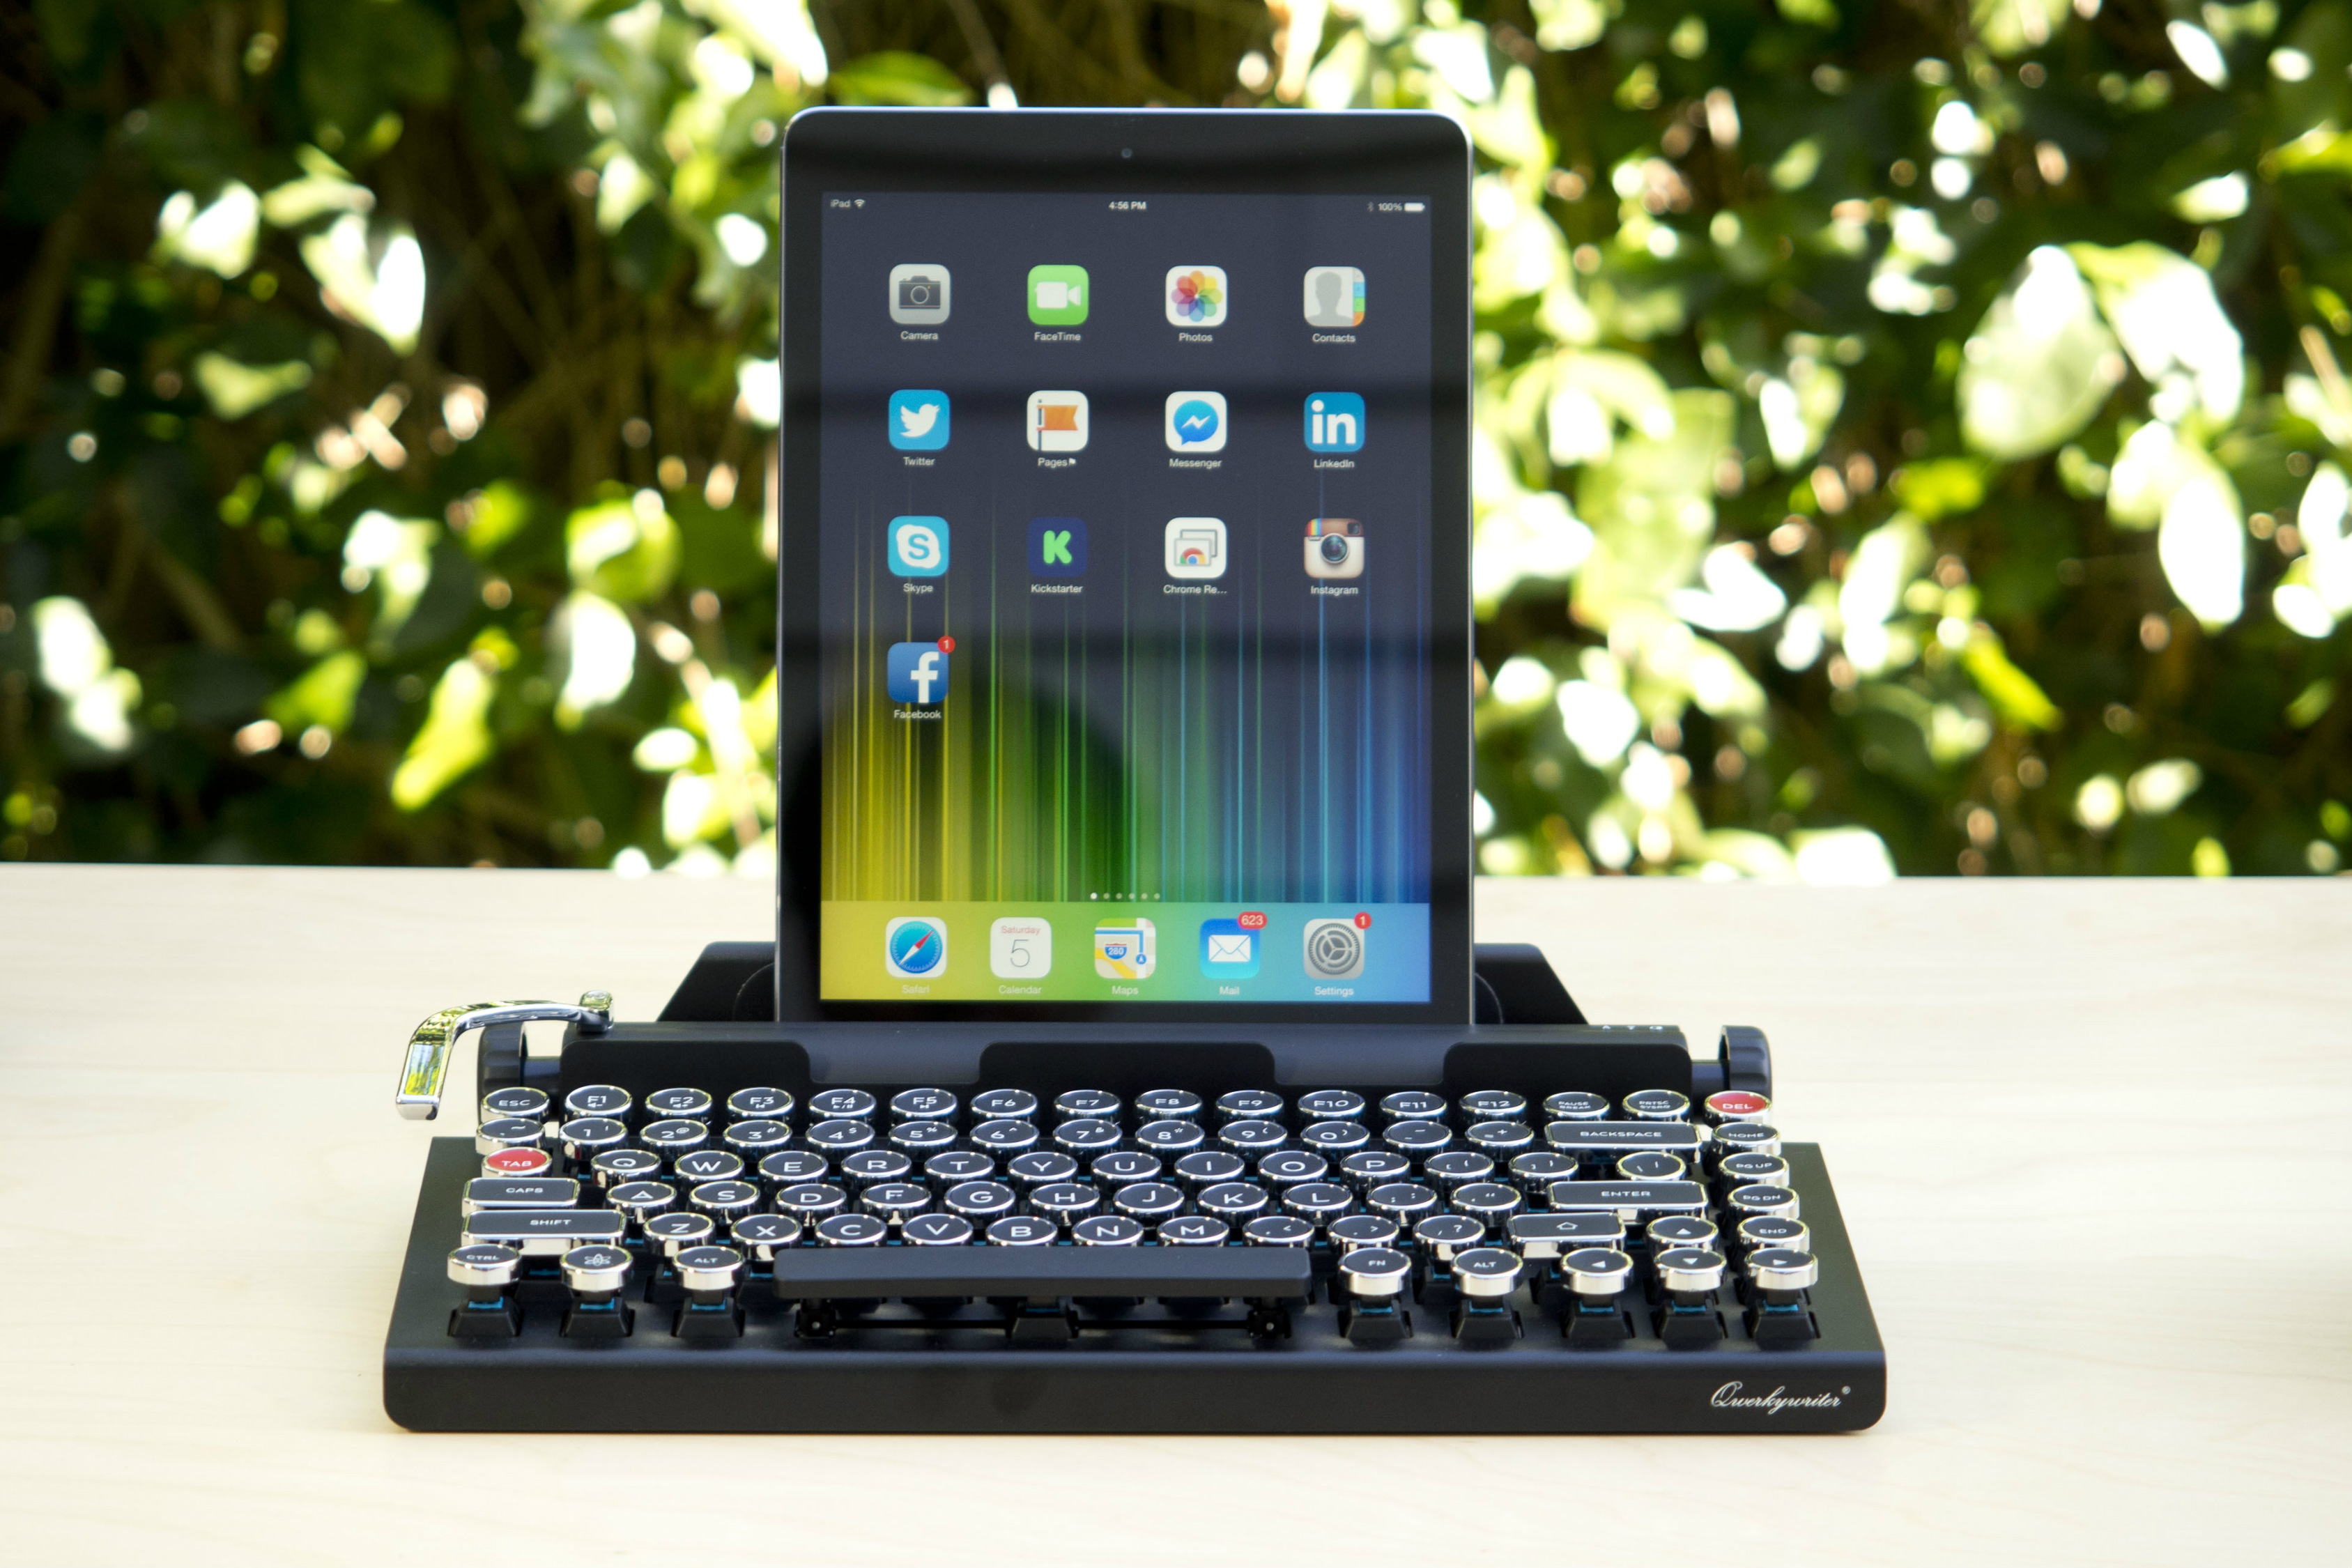 meet the keyboard that turns your tablet into a typewriter kinda qwerkywriter frontwithipad